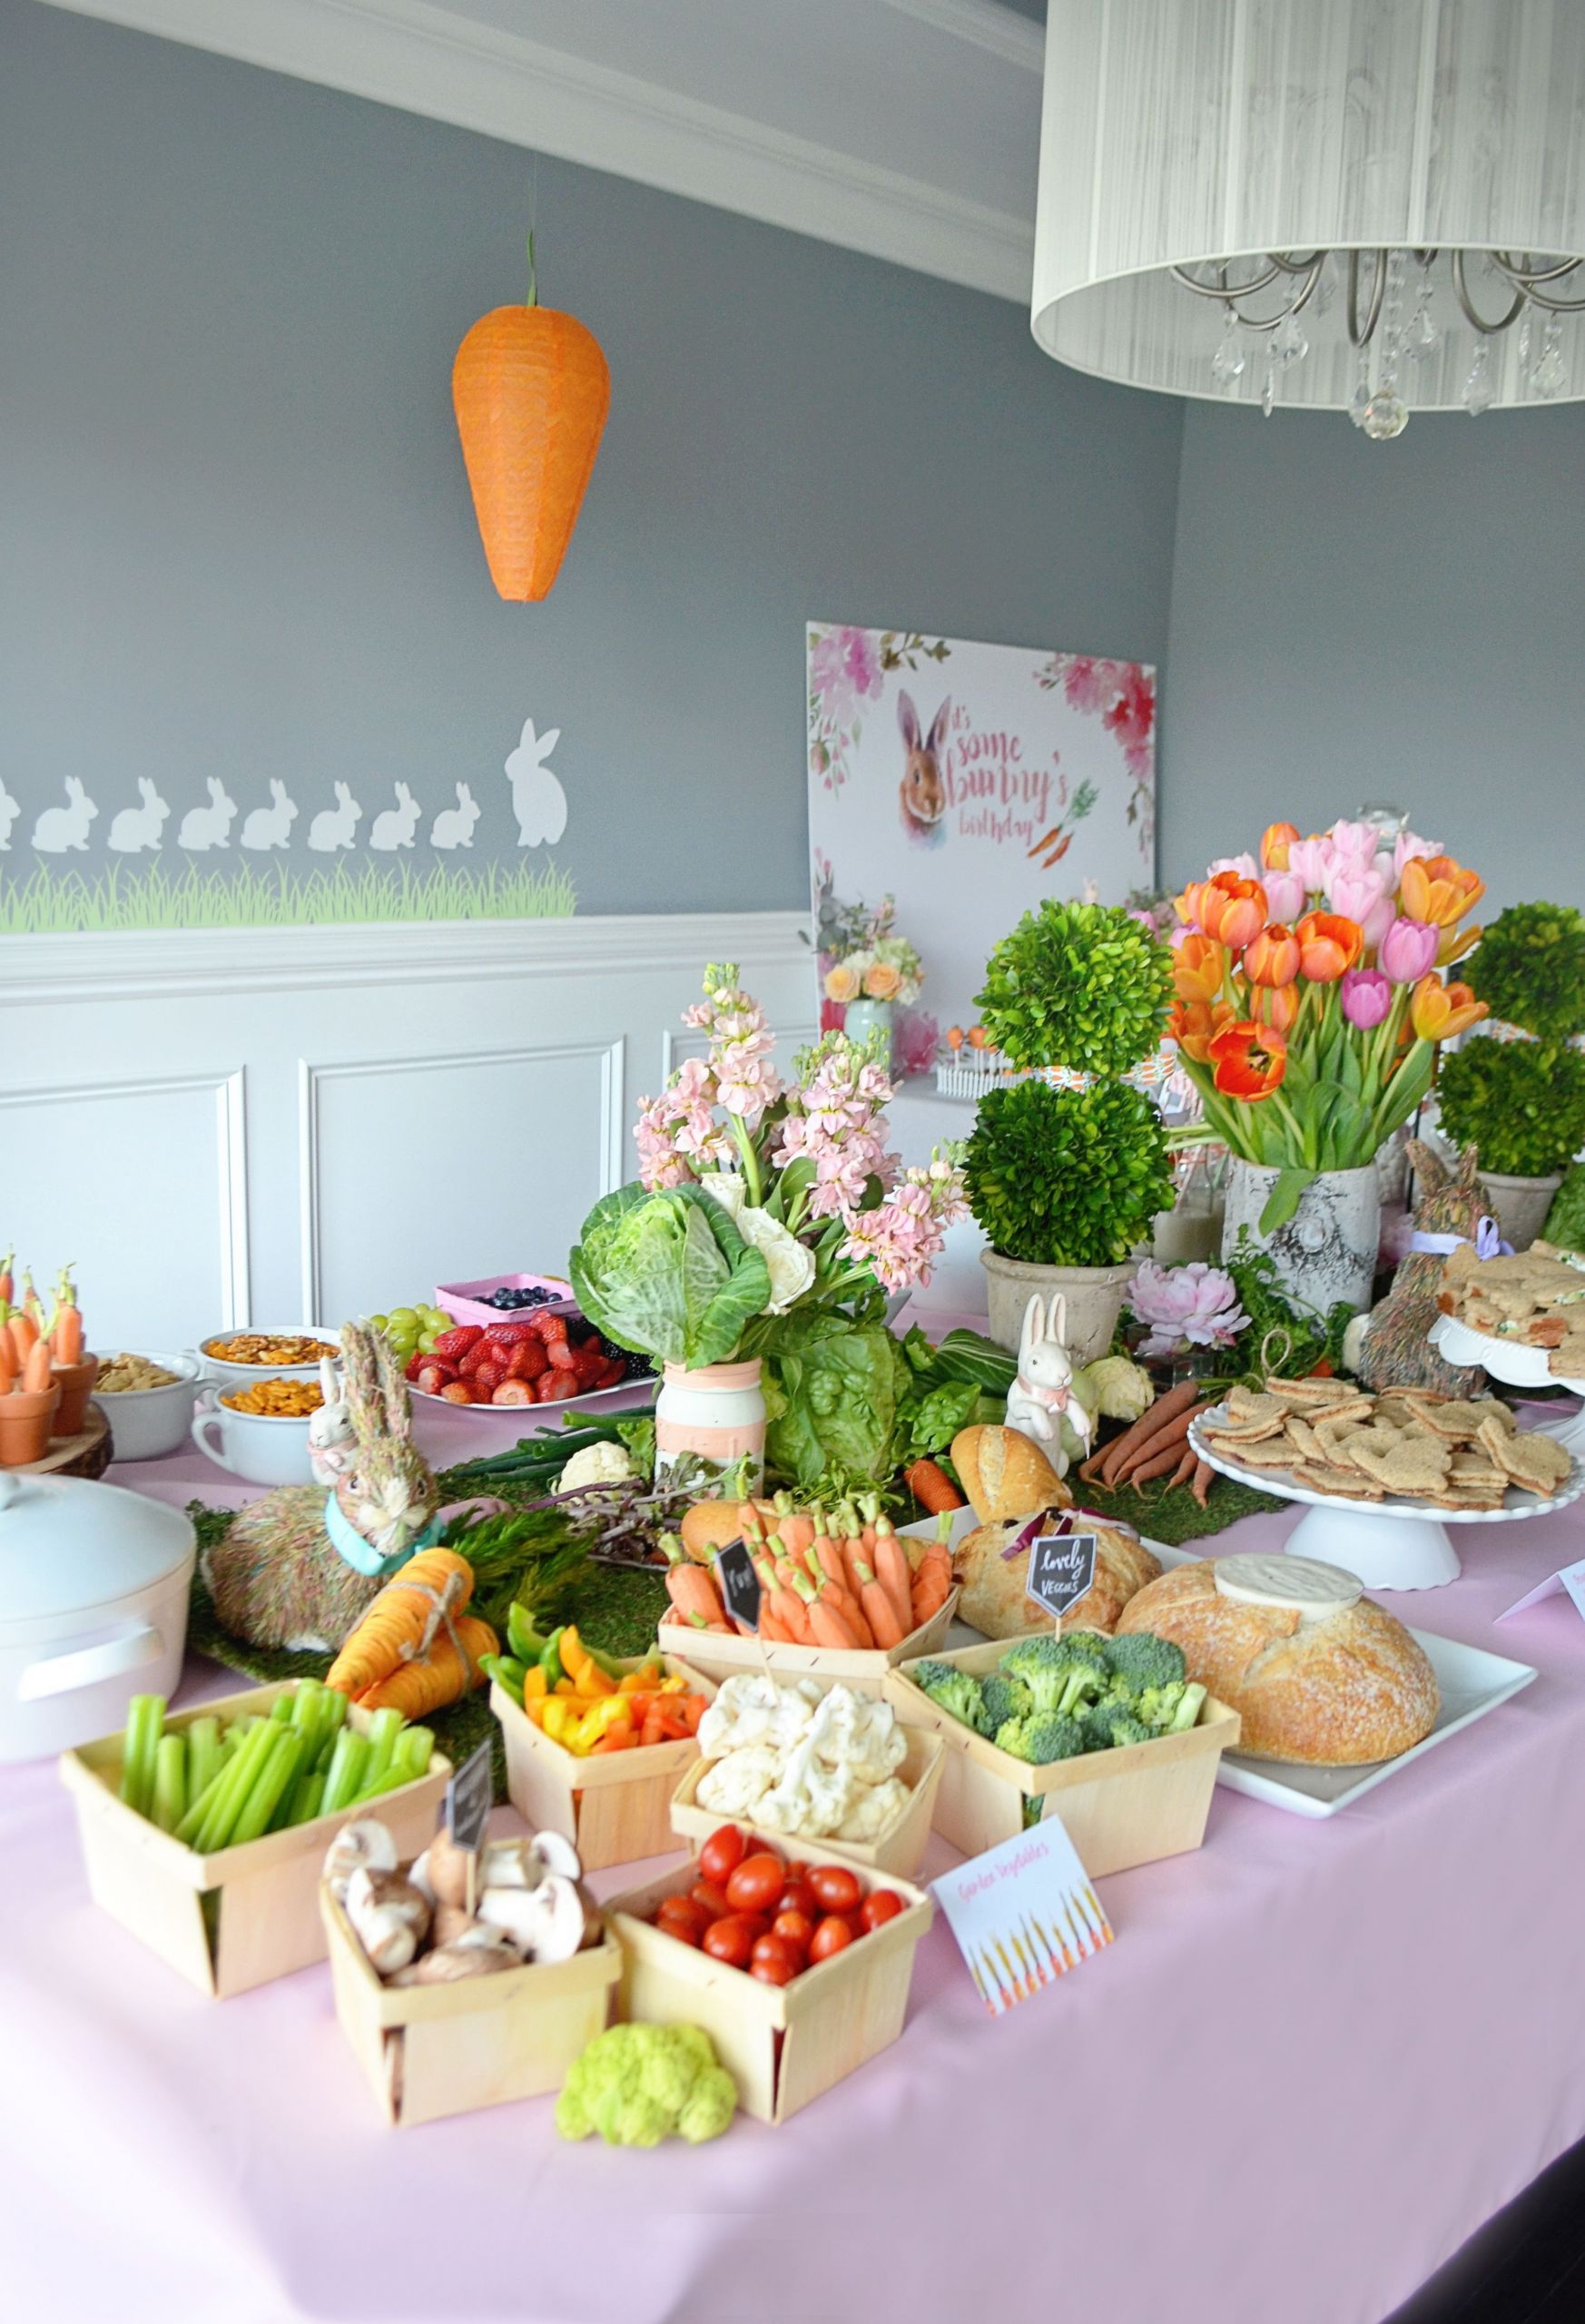 30 Of the Best Ideas for Easter theme Party Ideas Home, Family, Style